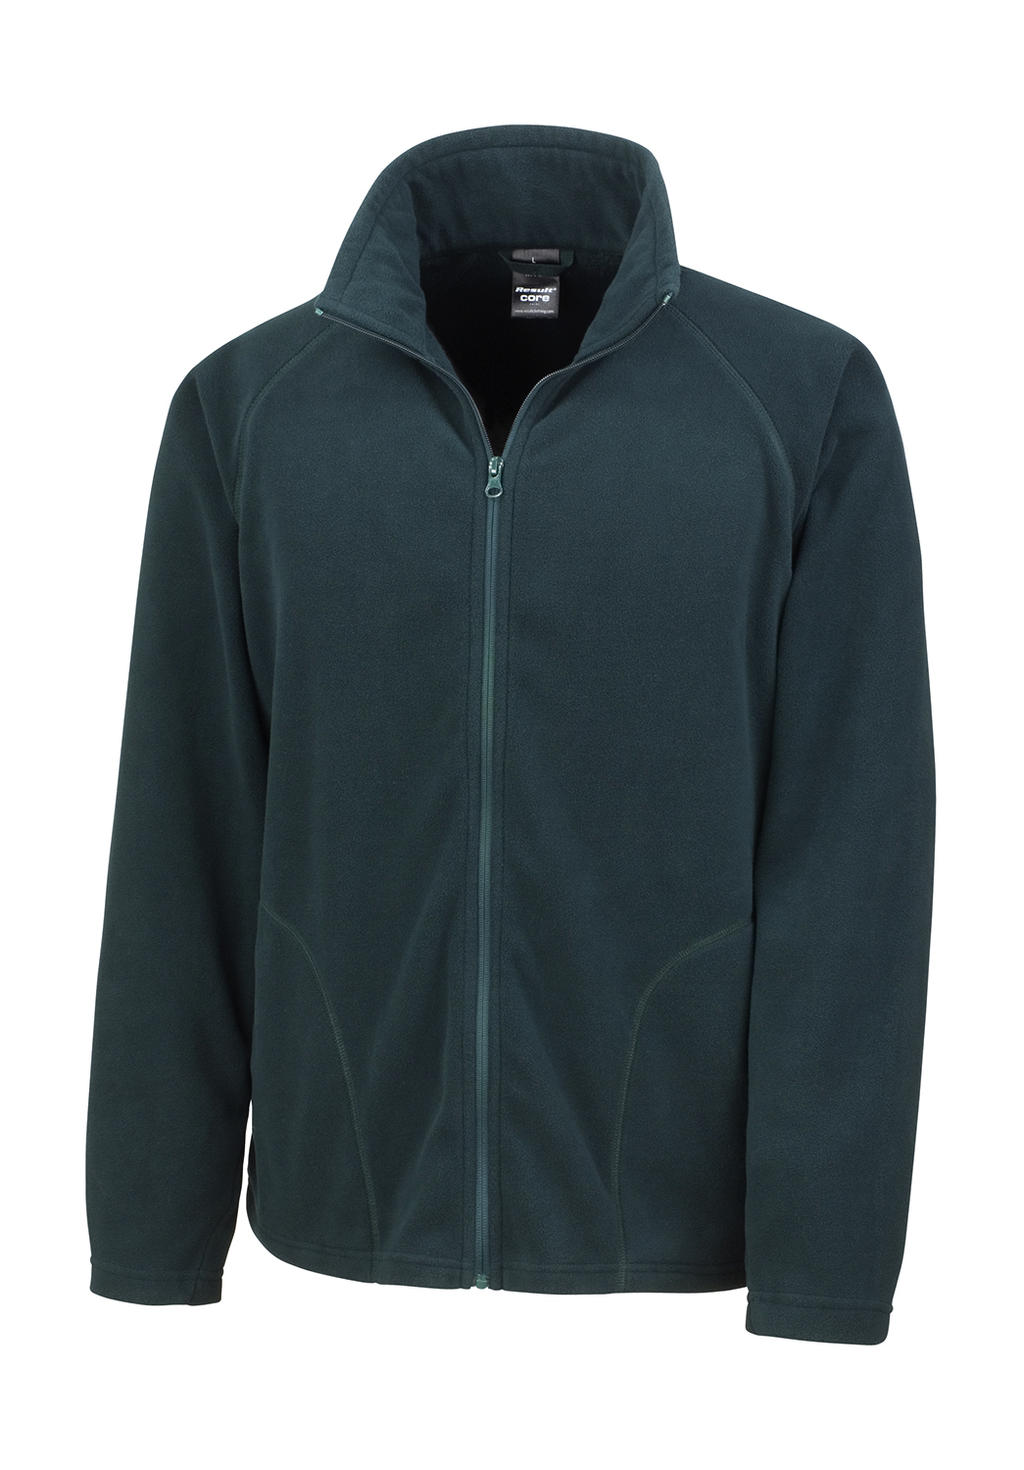  Microfleece Jacket in Farbe Forest Green